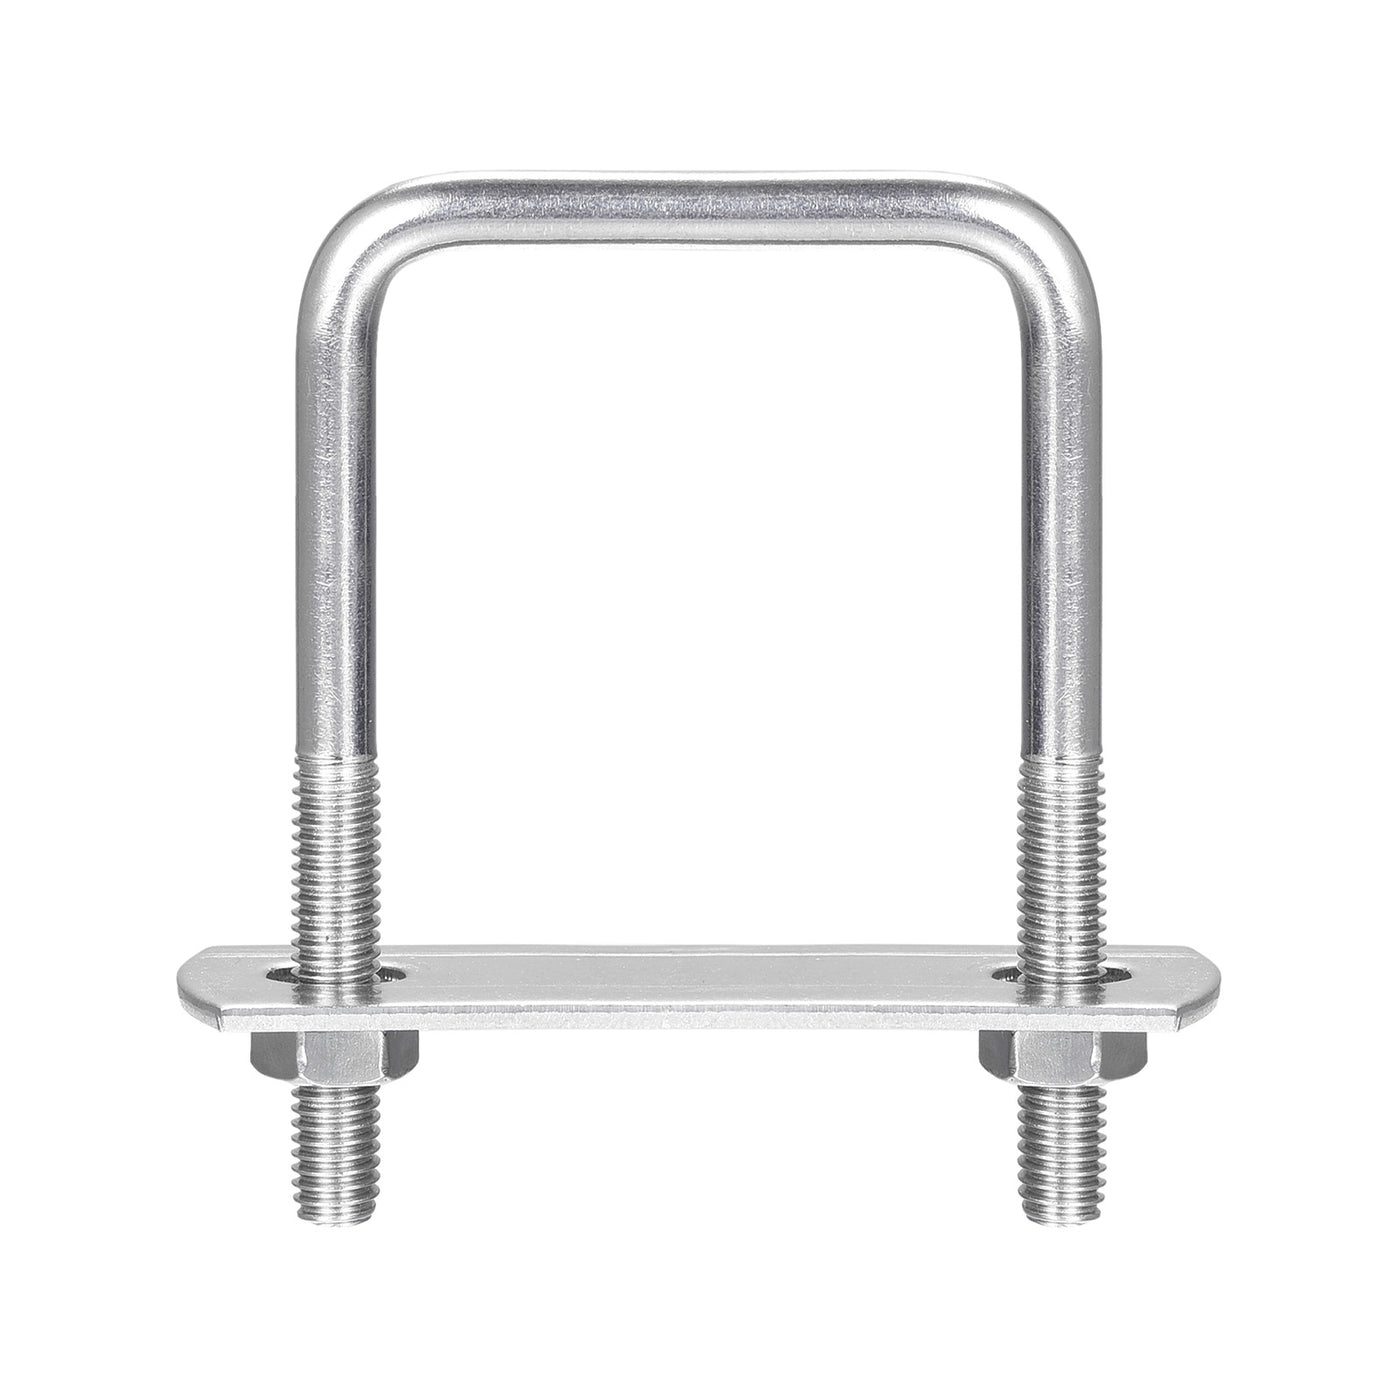 Uxcell Uxcell Square U-Bolts, 3 Sets 72mm Inner Width 100mm Length M6 with Nuts and Plates